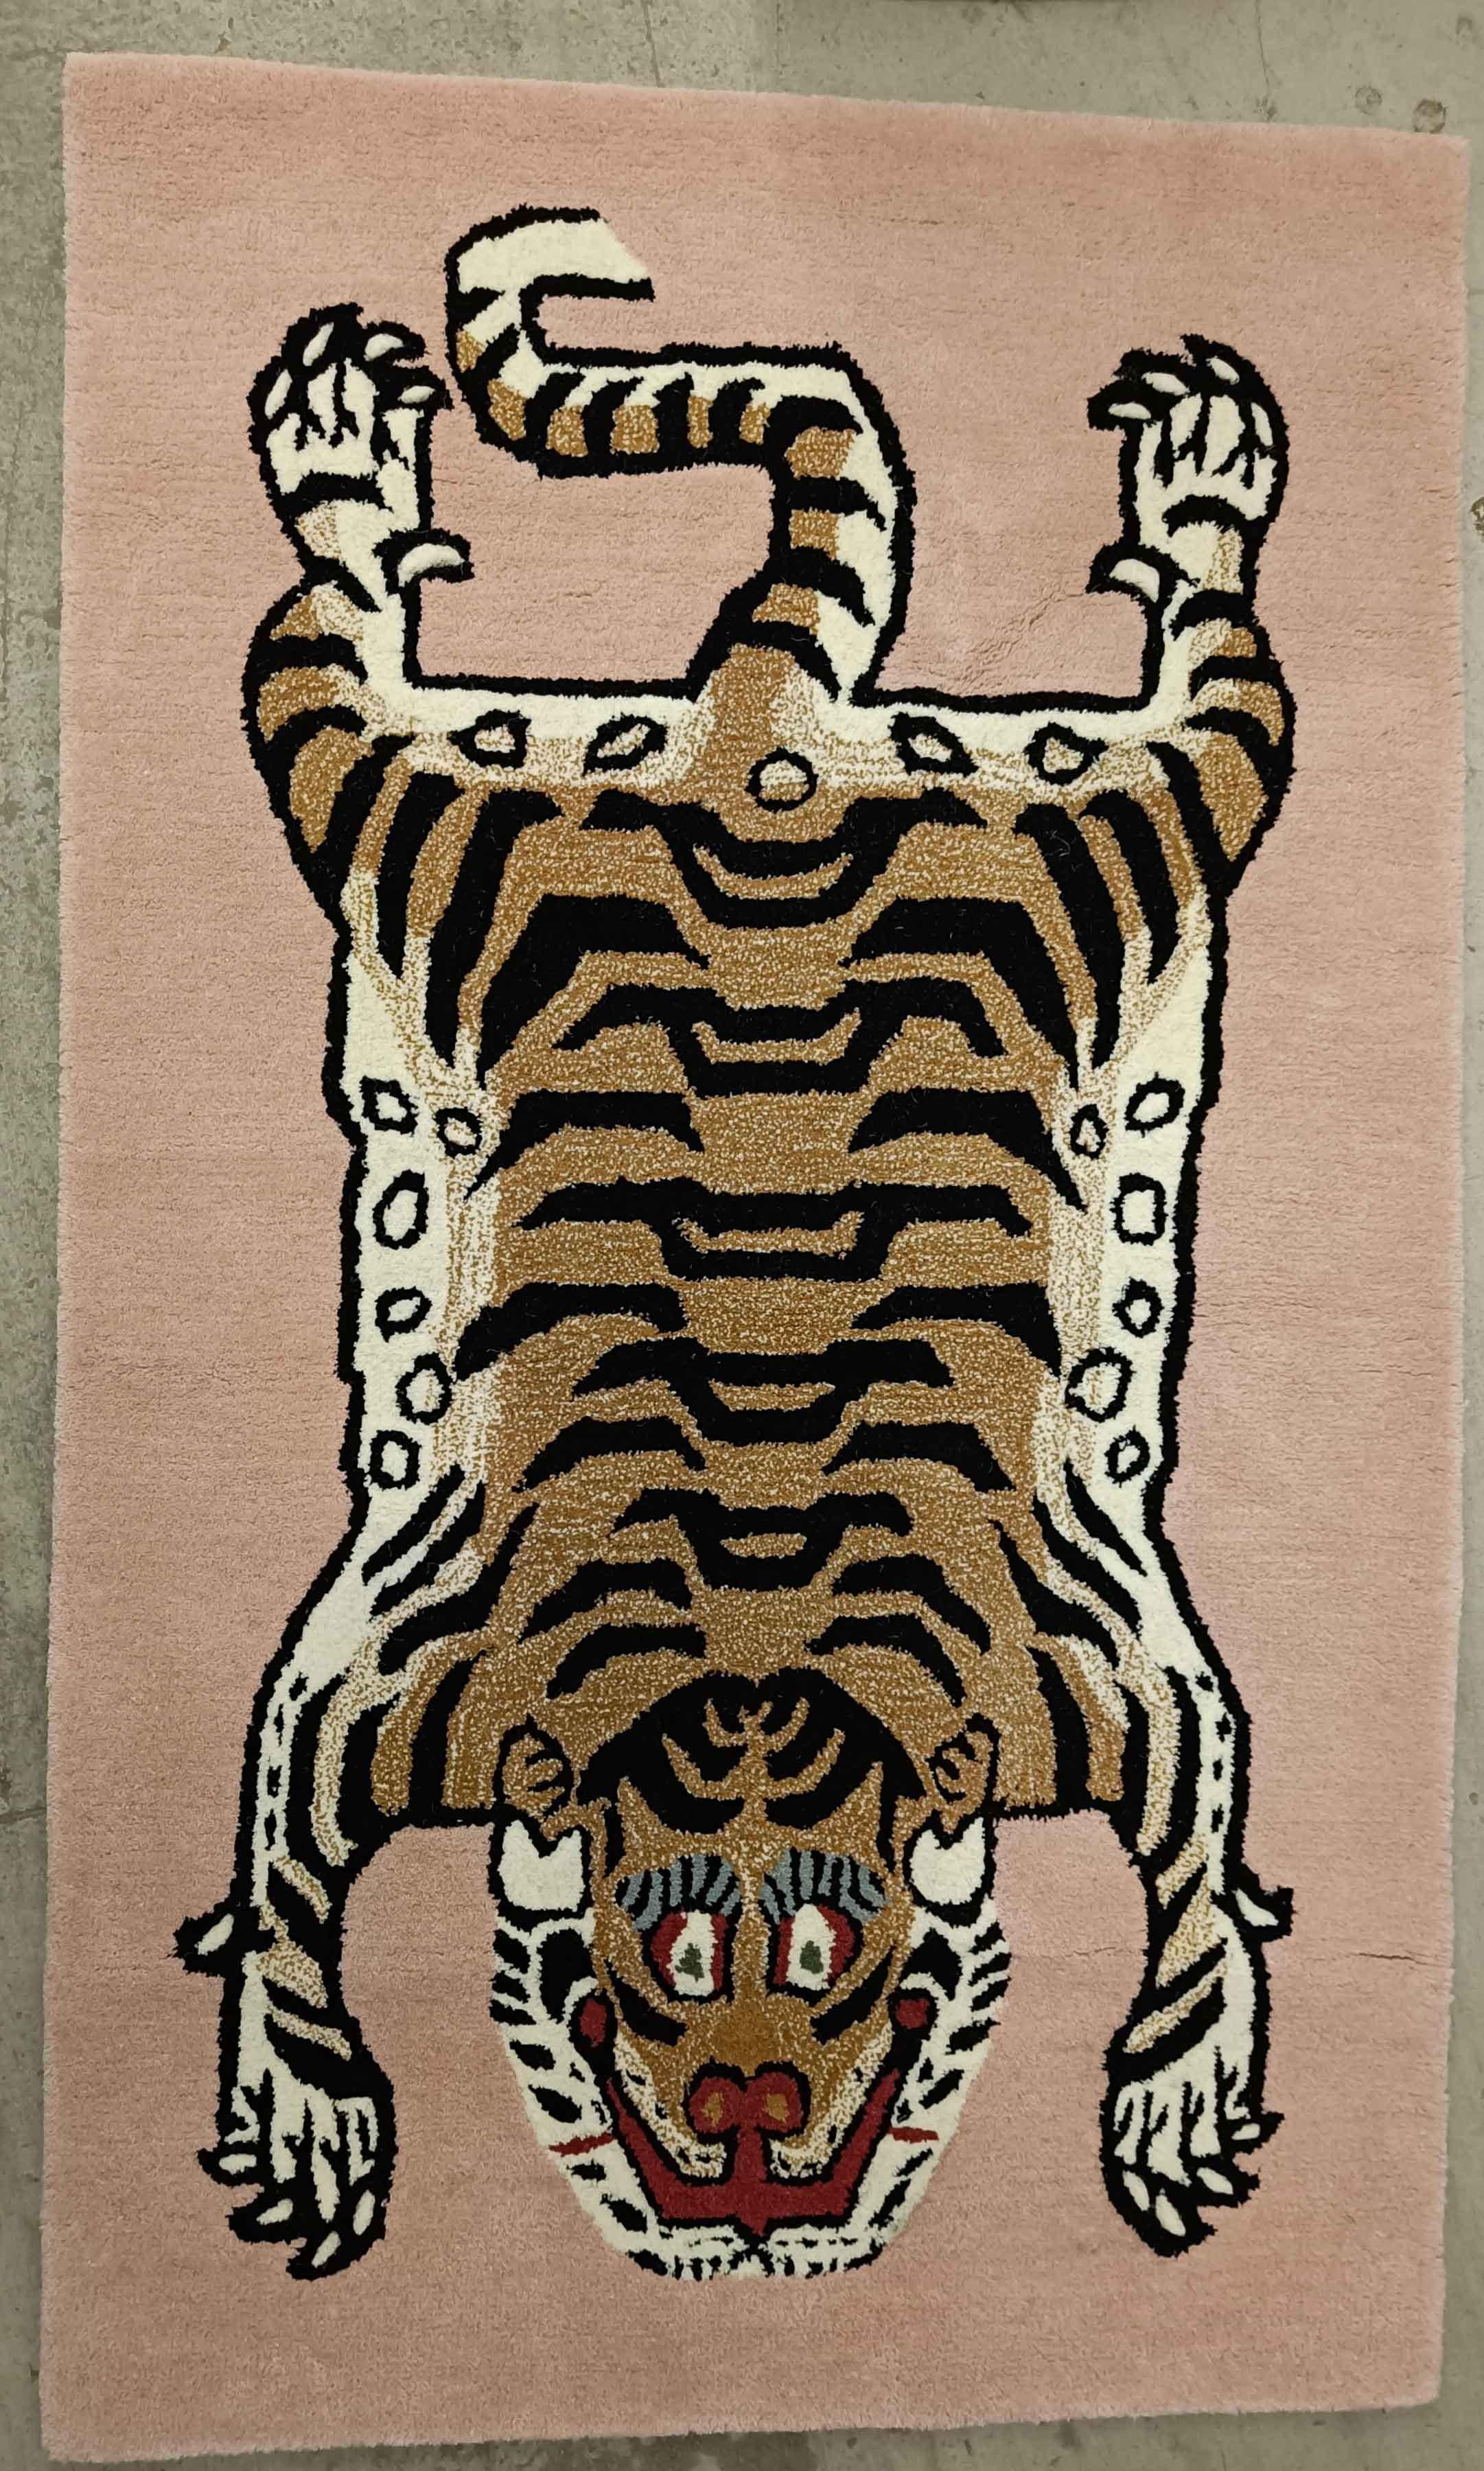  
Contemporary Mughal Tiger design wool Rug Home décor Interior design Carpets

Cool Mughal design Tiger wool rug in pink background 

New hand crafted in India 
 
Size 150 x 90cm
 